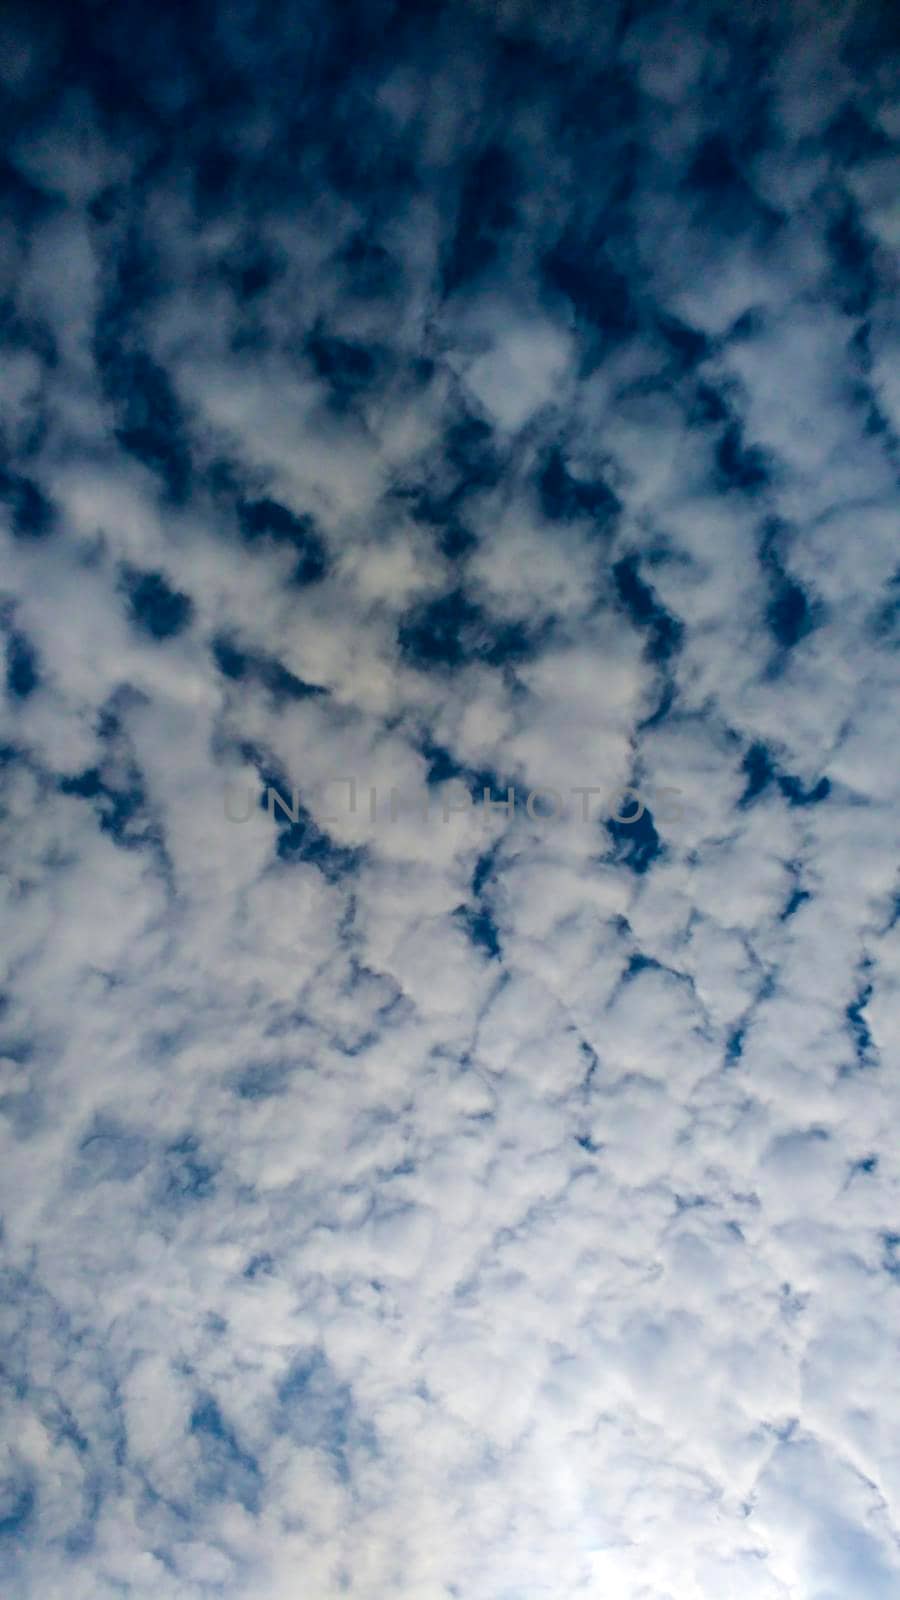 Sky with Altocumulus clouds in Spain by soniabonet